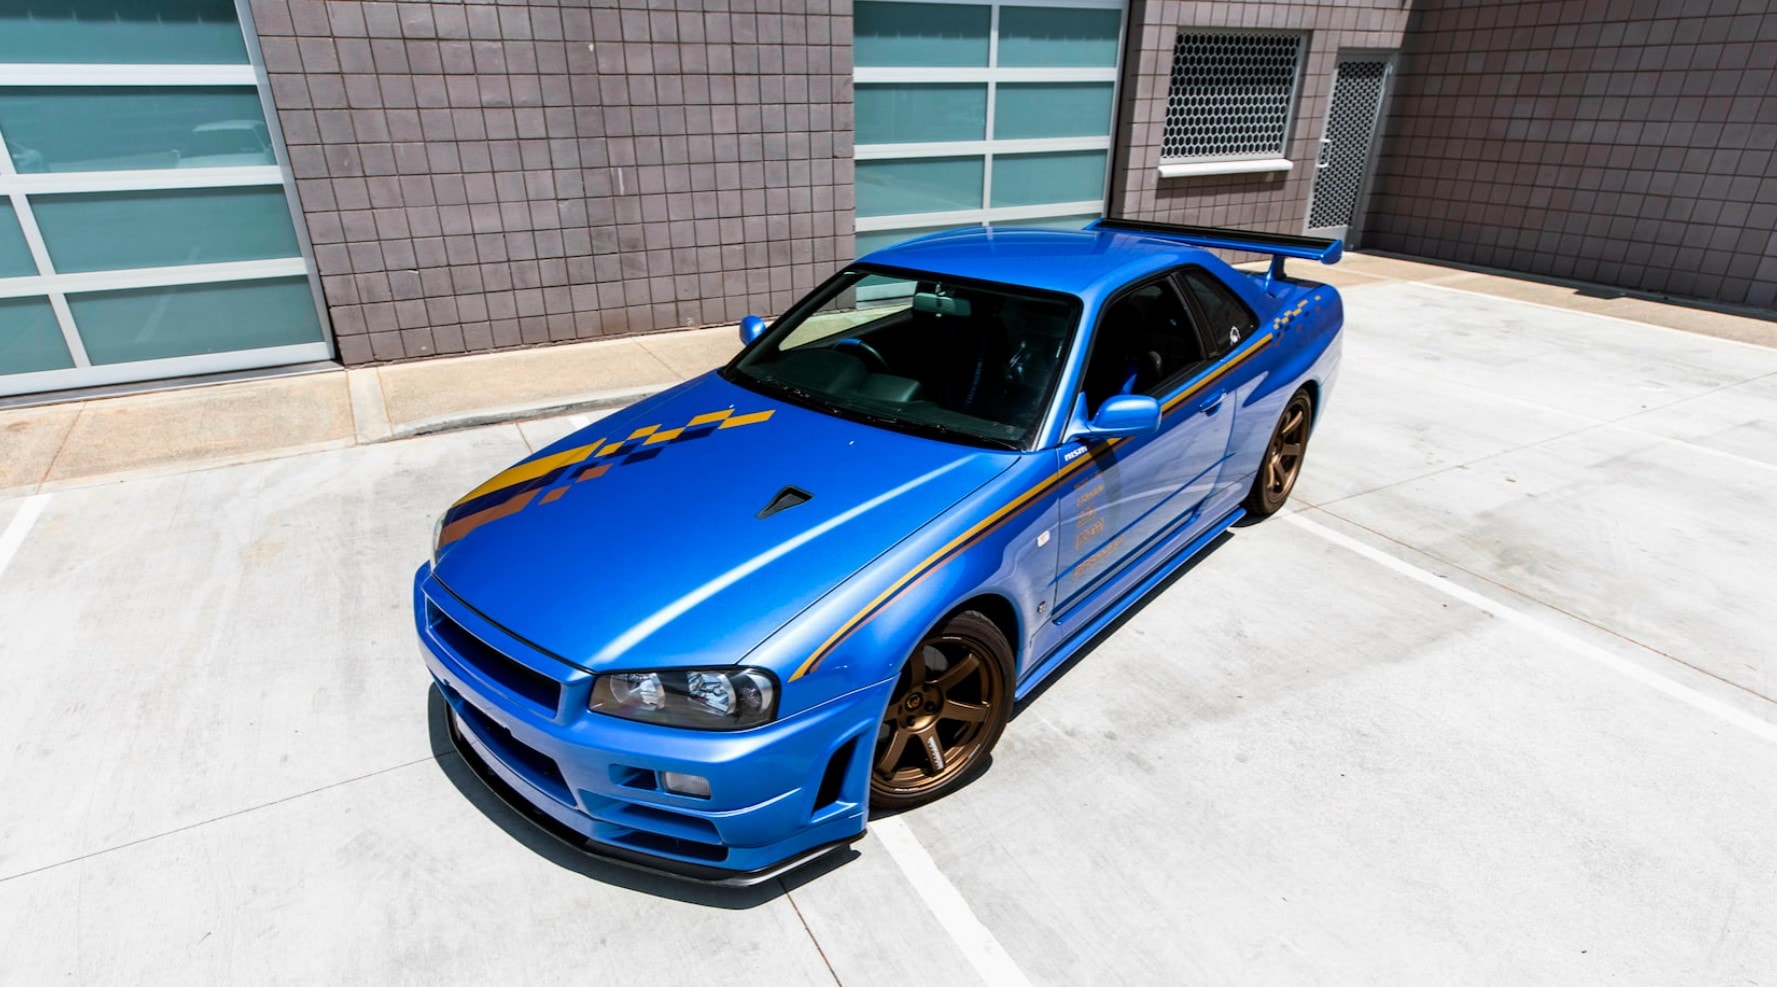 This Nissan Skyline R34 GT-R V-SPEC II Driven by Paul Walker Just